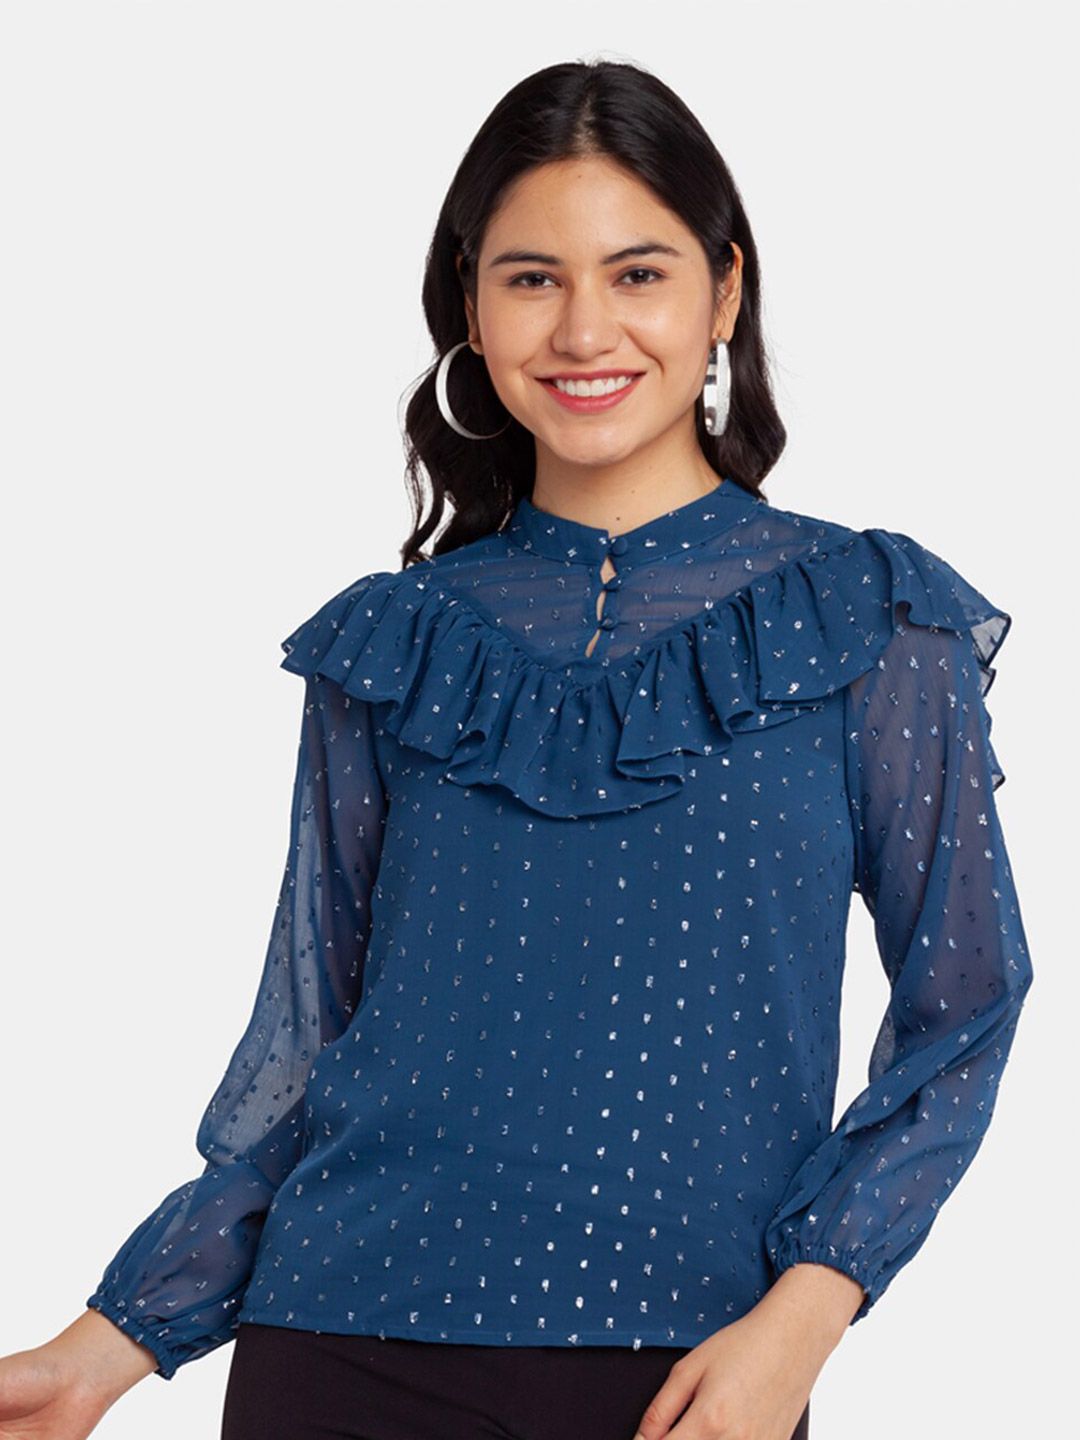 Zink London Blue Print Top Price in India